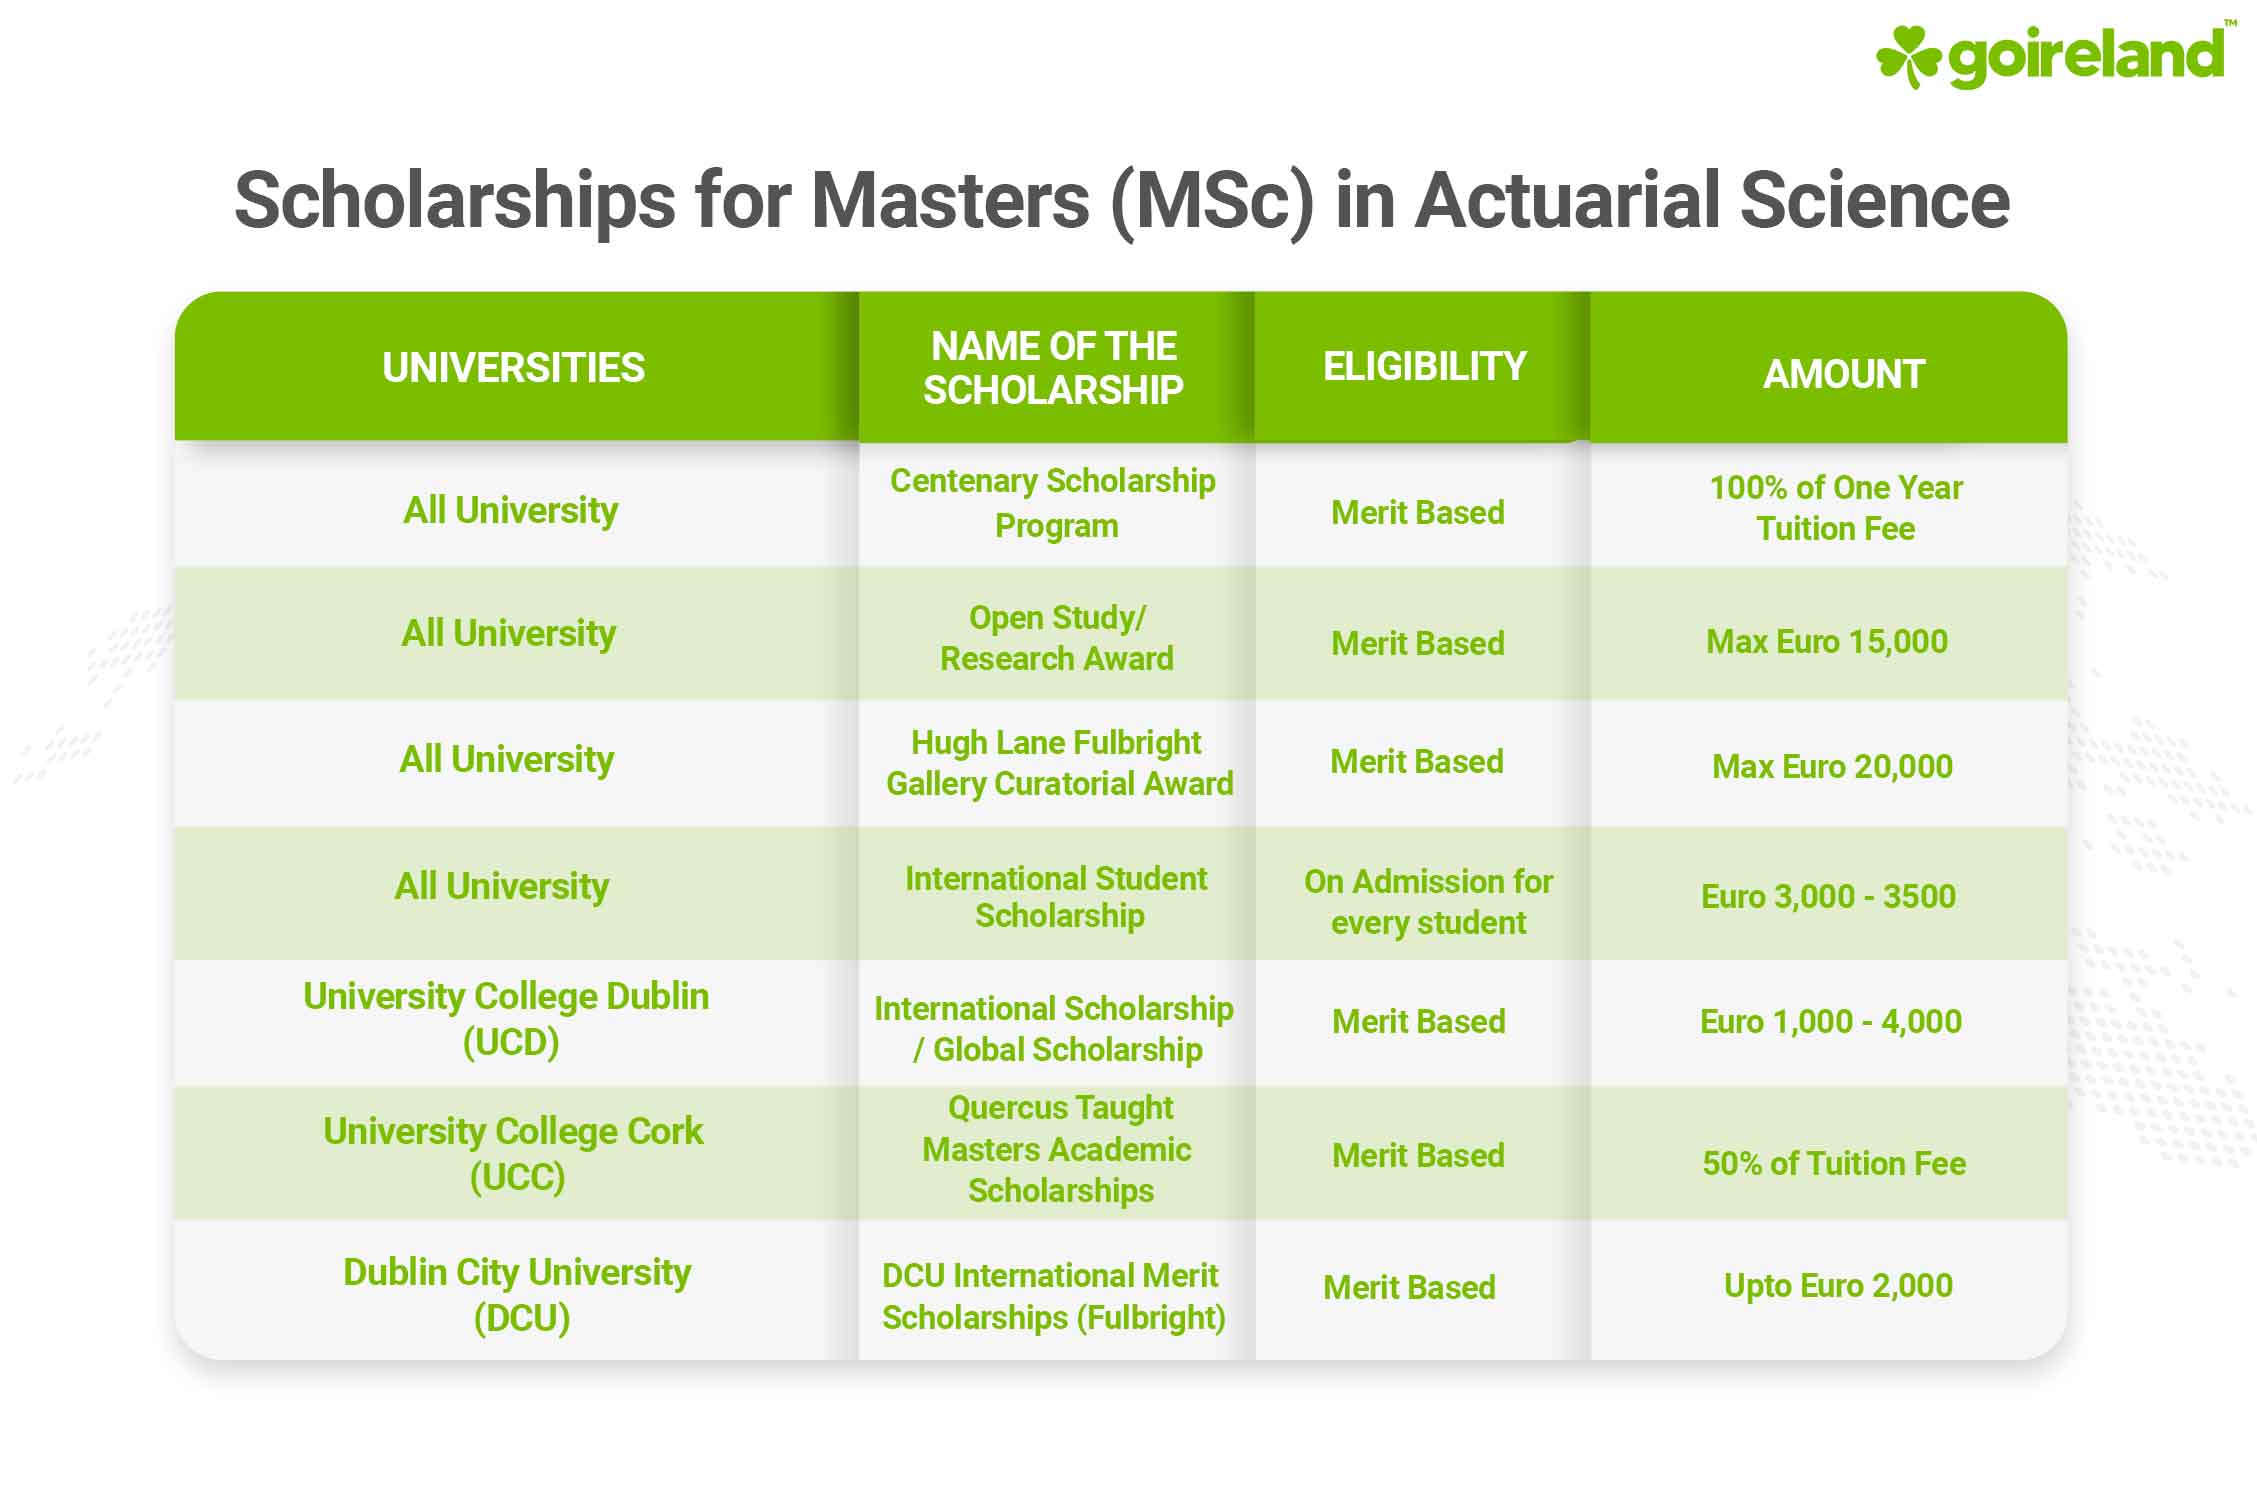 Actuarial Science Scholarships